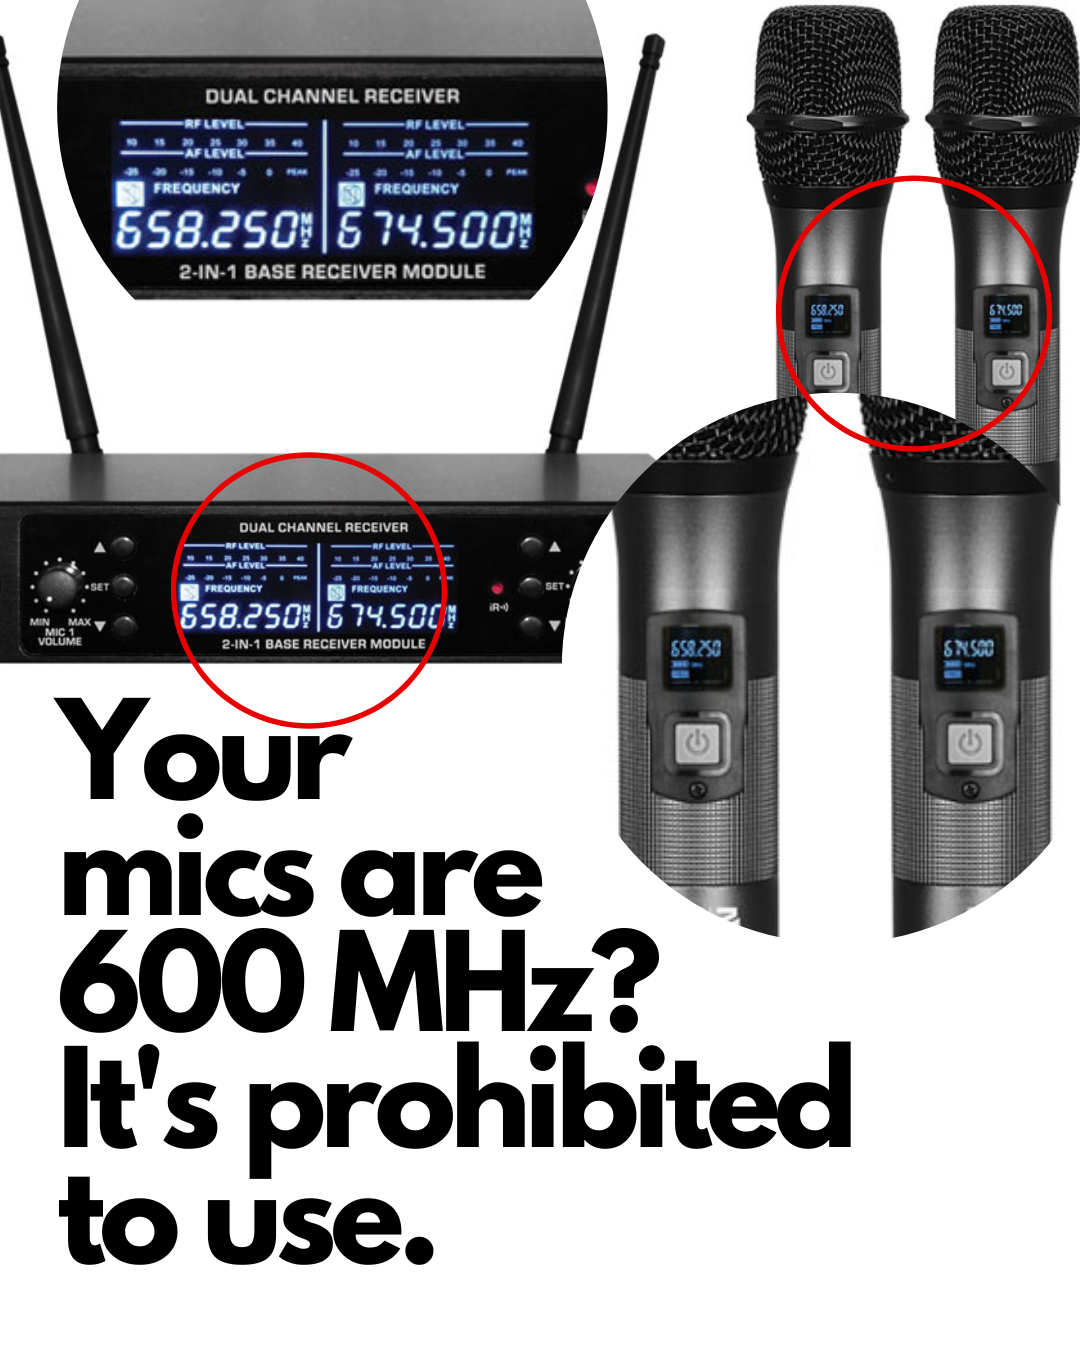 Wireless microphones what are Pros and cons of wireless microphones?